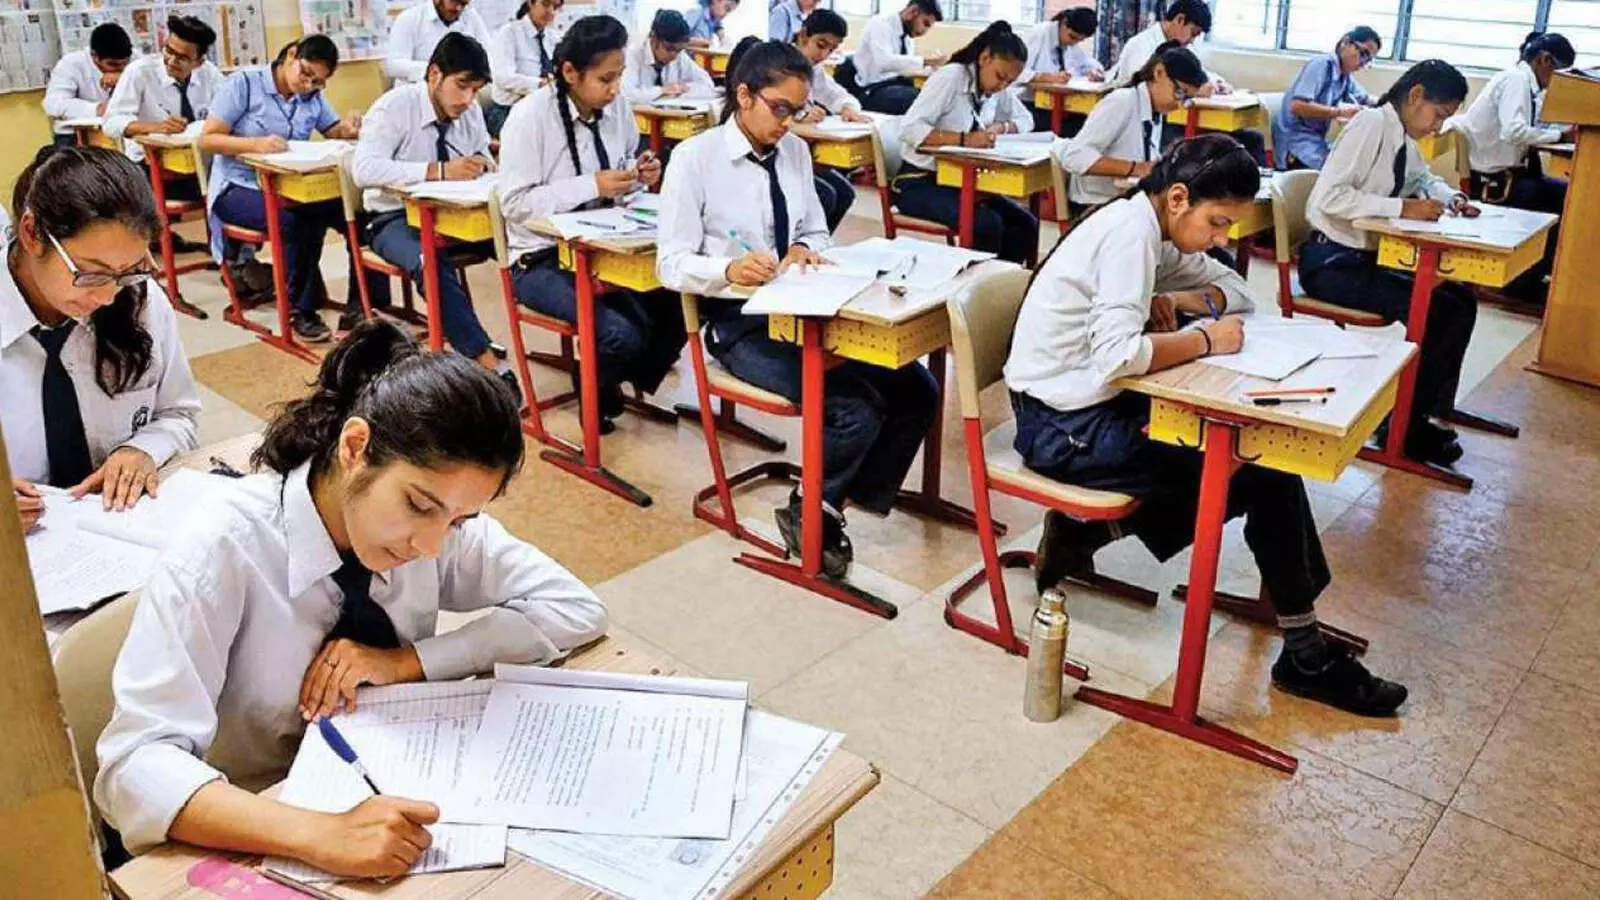 Maharashtra cancels exams for classes 1-8, all students to be promoted